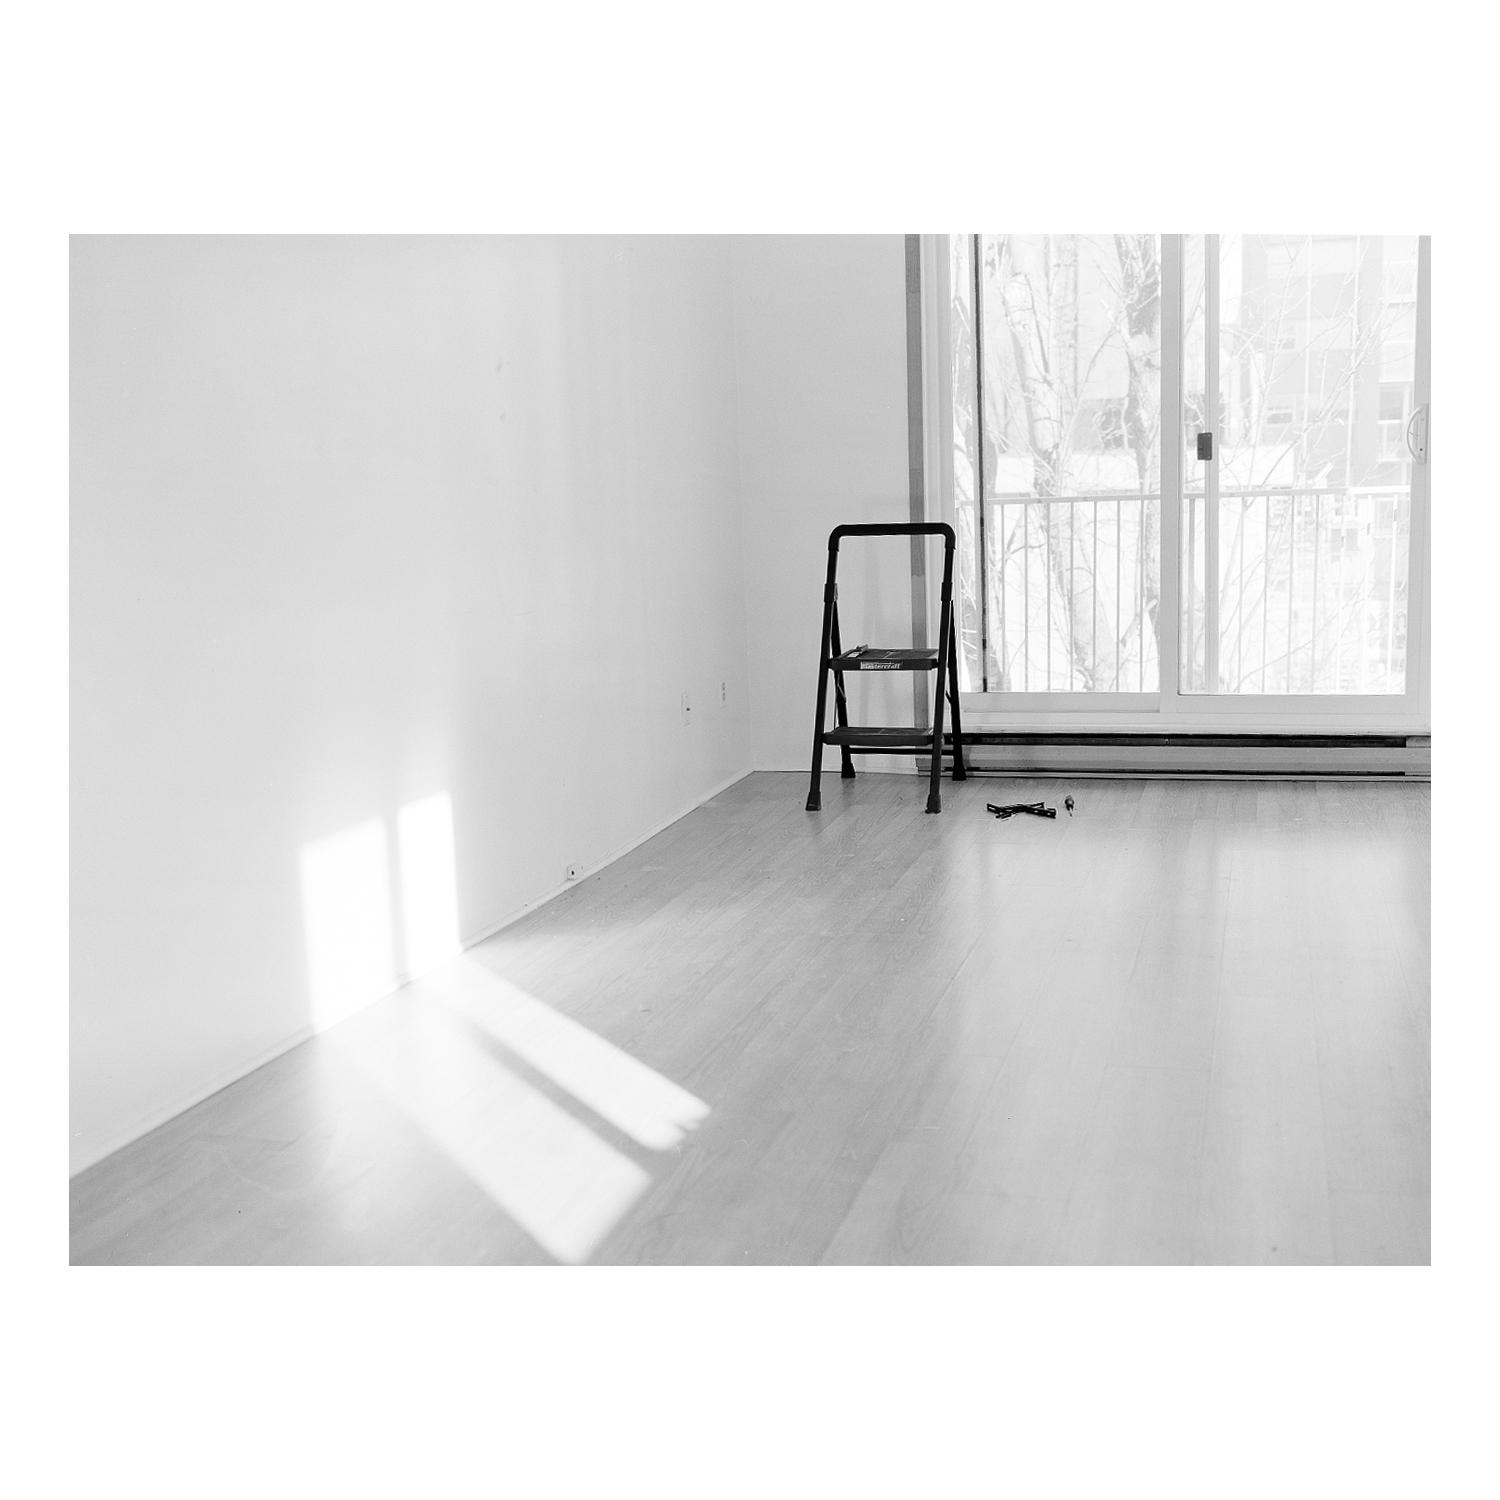 Black-and-white image of an empty room. A stepladder sits near a sliding glass door. Light reflects off the wall and floor.